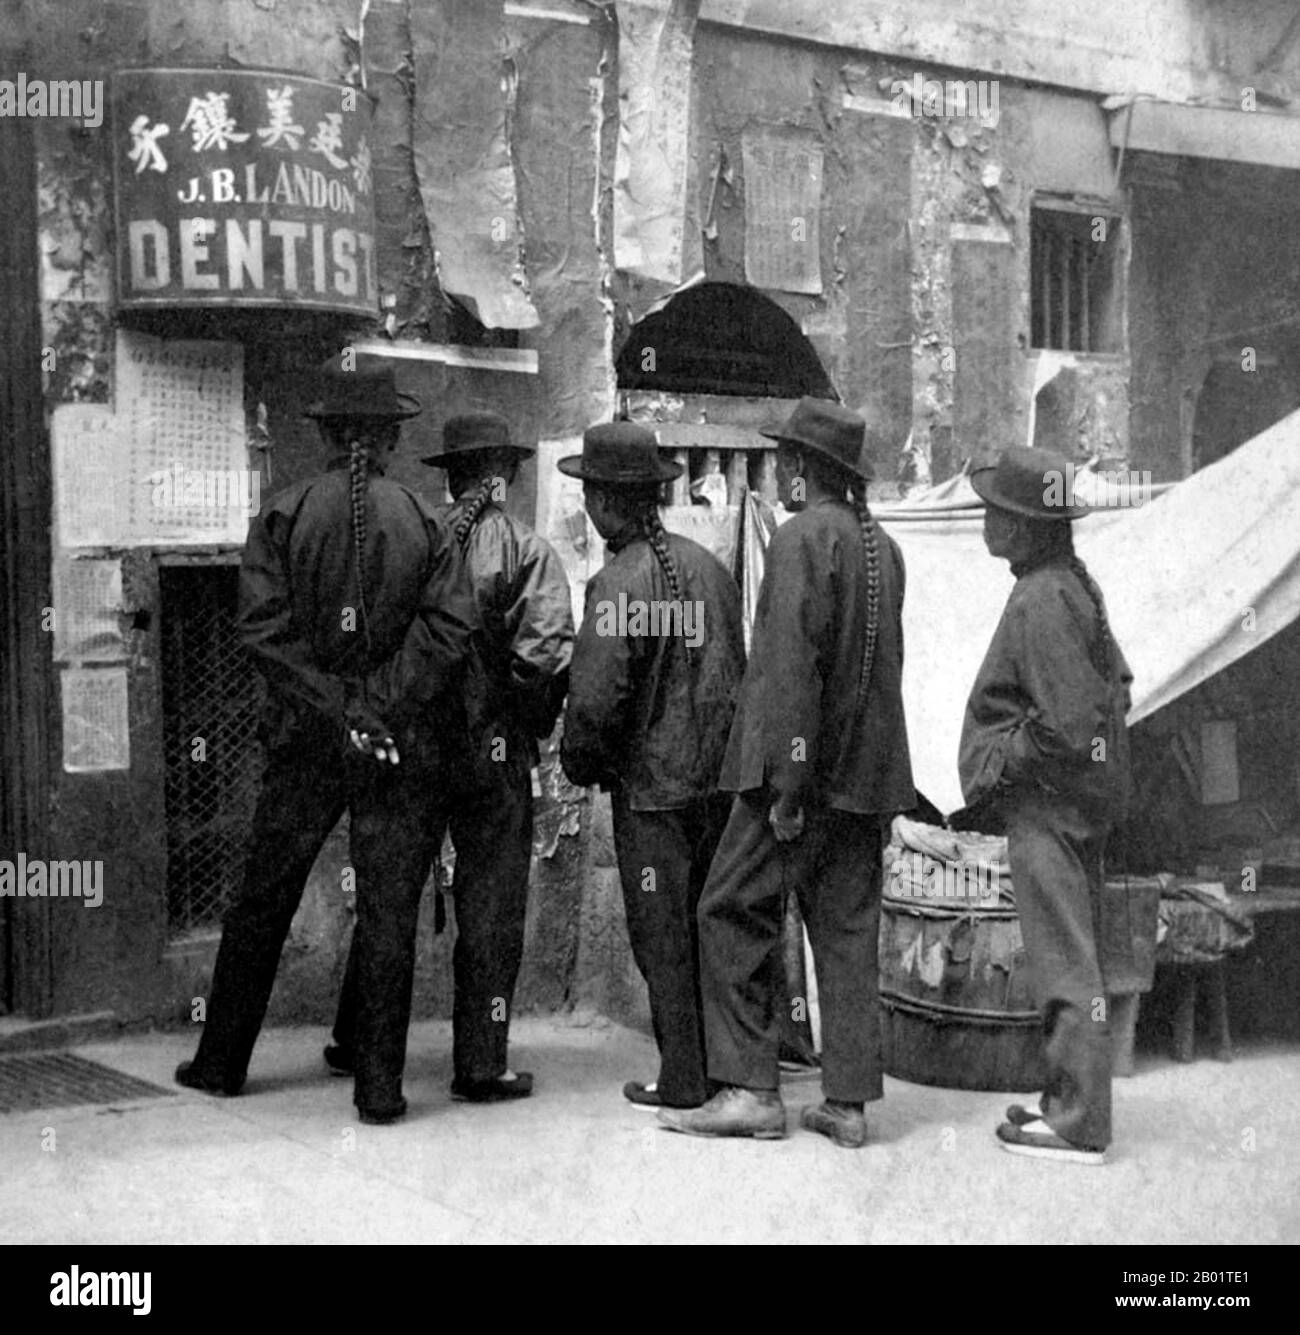 USA: Five Chinese men with queues reading a wall poster, San Francisco Chinatown, c. 1900.  San Francisco's Chinatown was the port of entry for early Hoisanese and Zhongshanese Chinese immigrants from the Guangdong province of southern China from the 1850s to the 1900s. The area was the one geographical region deeded by the city government and private property owners which allowed Chinese persons to inherit and inhabit dwellings within the city.  The majority of these Chinese shopkeepers, restaurant owners, and hired workers in San Francisco Chinatown were predominantly Hoisanese and male. Stock Photo